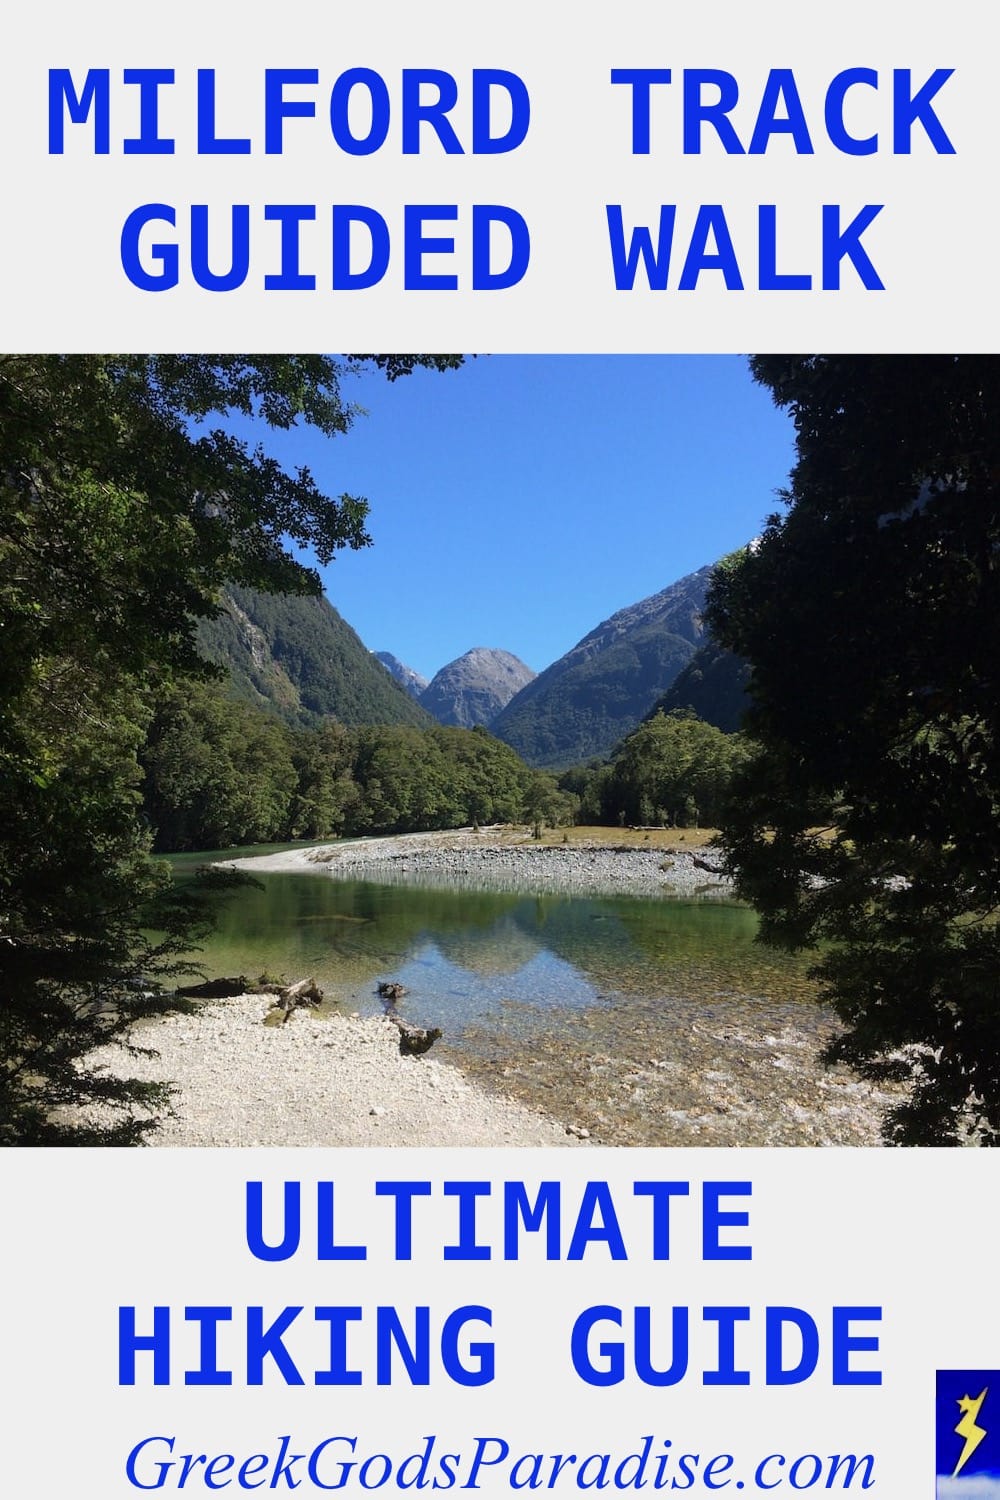 Milford Track Guided Walk Ultimate Hiking Guide